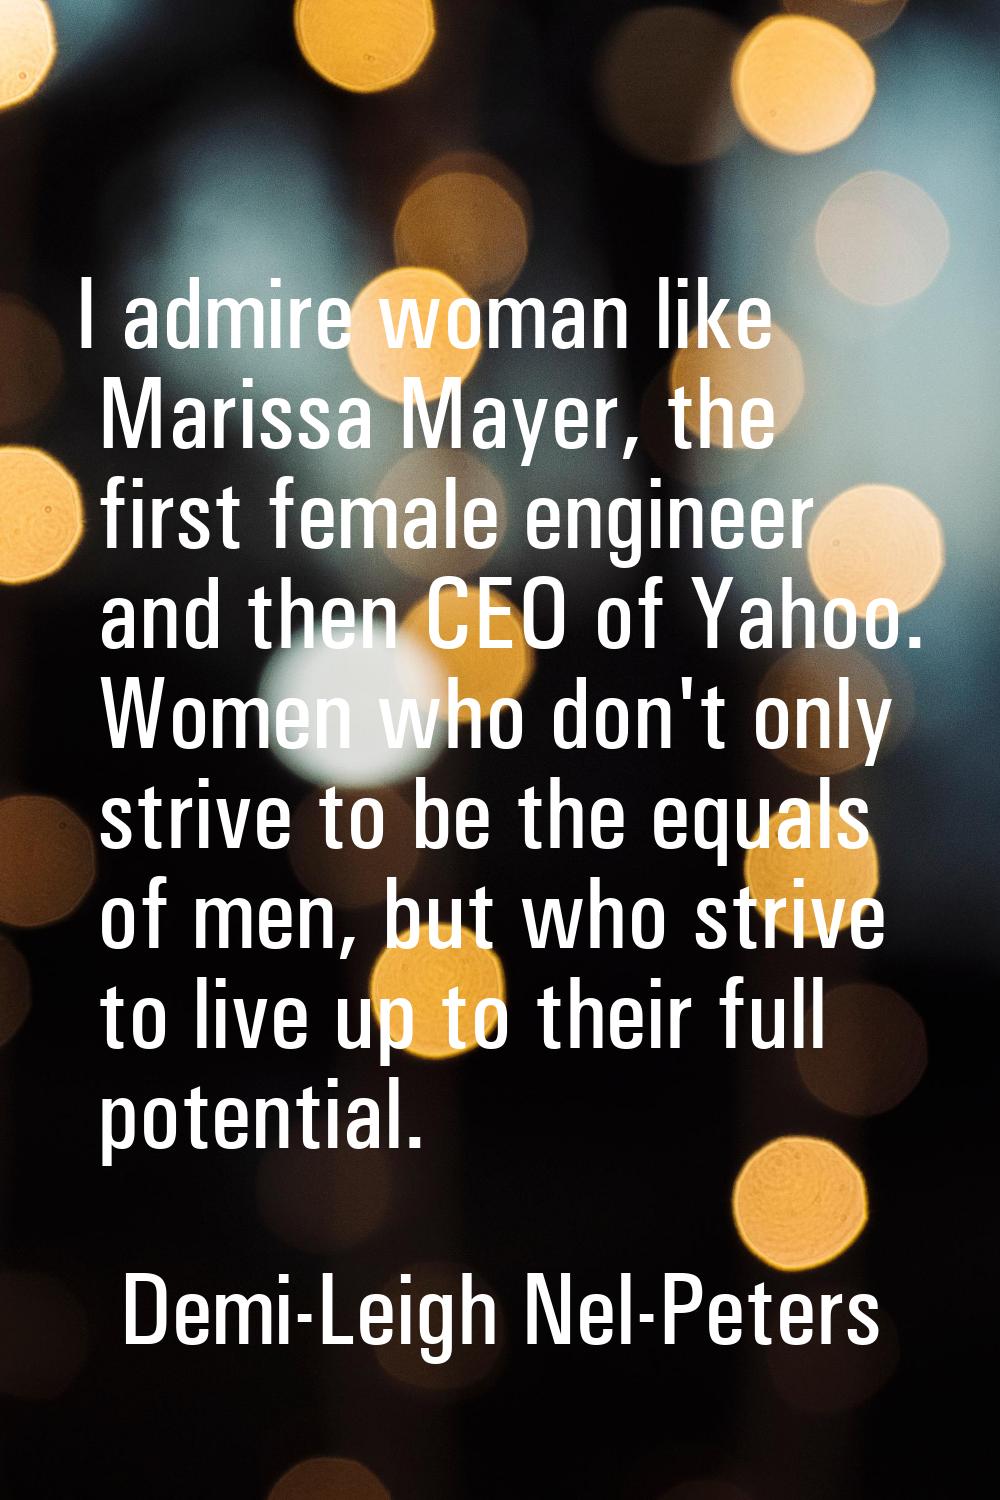 I admire woman like Marissa Mayer, the first female engineer and then CEO of Yahoo. Women who don't